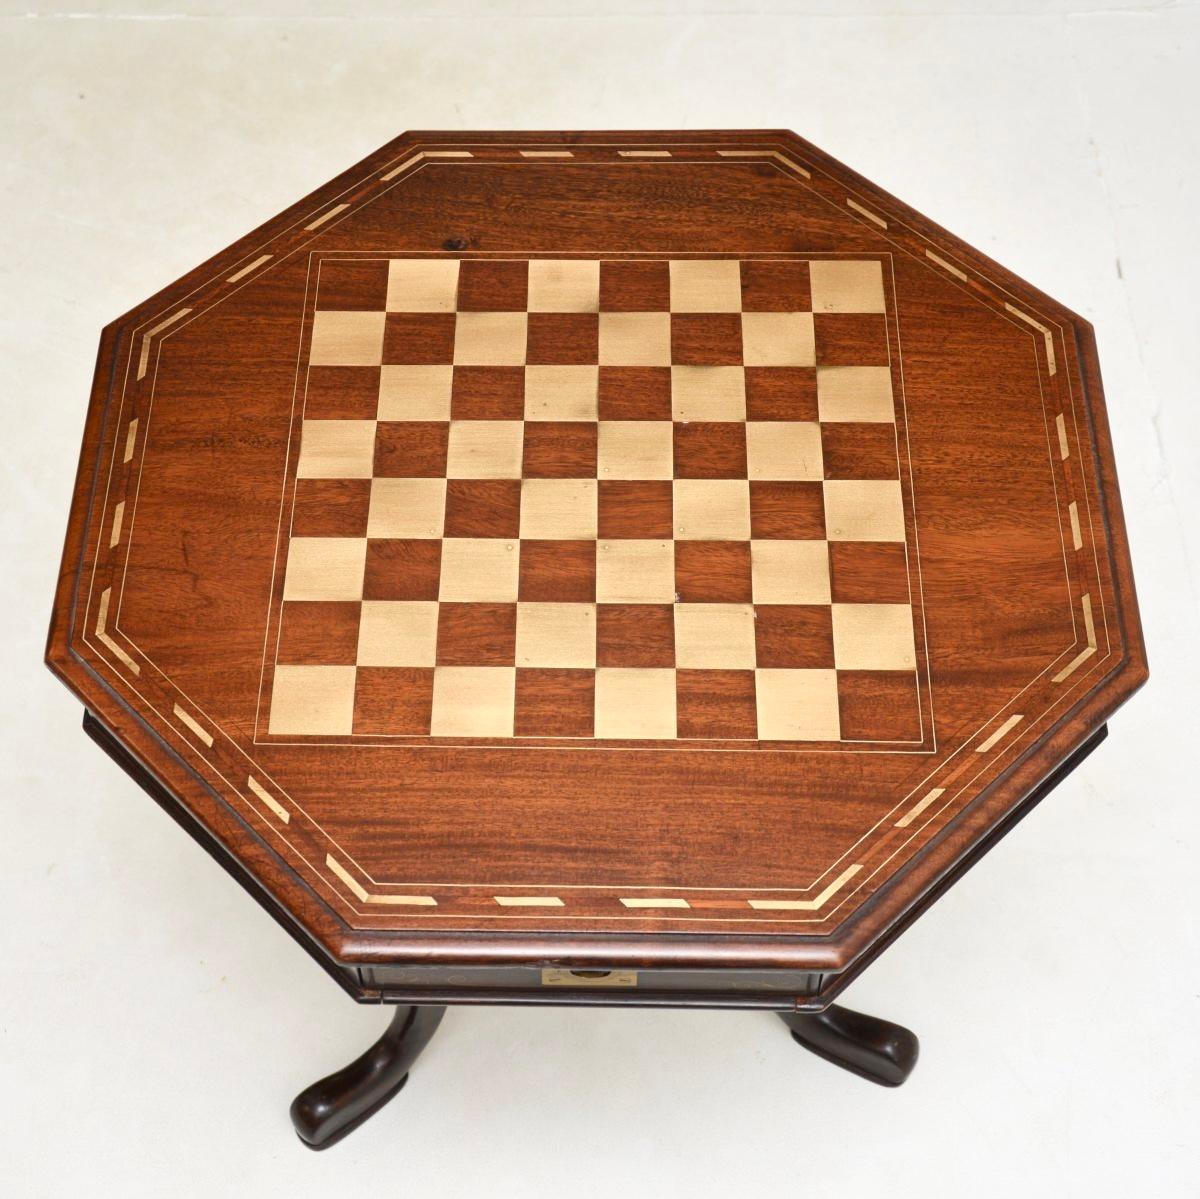 British Antique Inlaid Brass Side / Chess Table For Sale